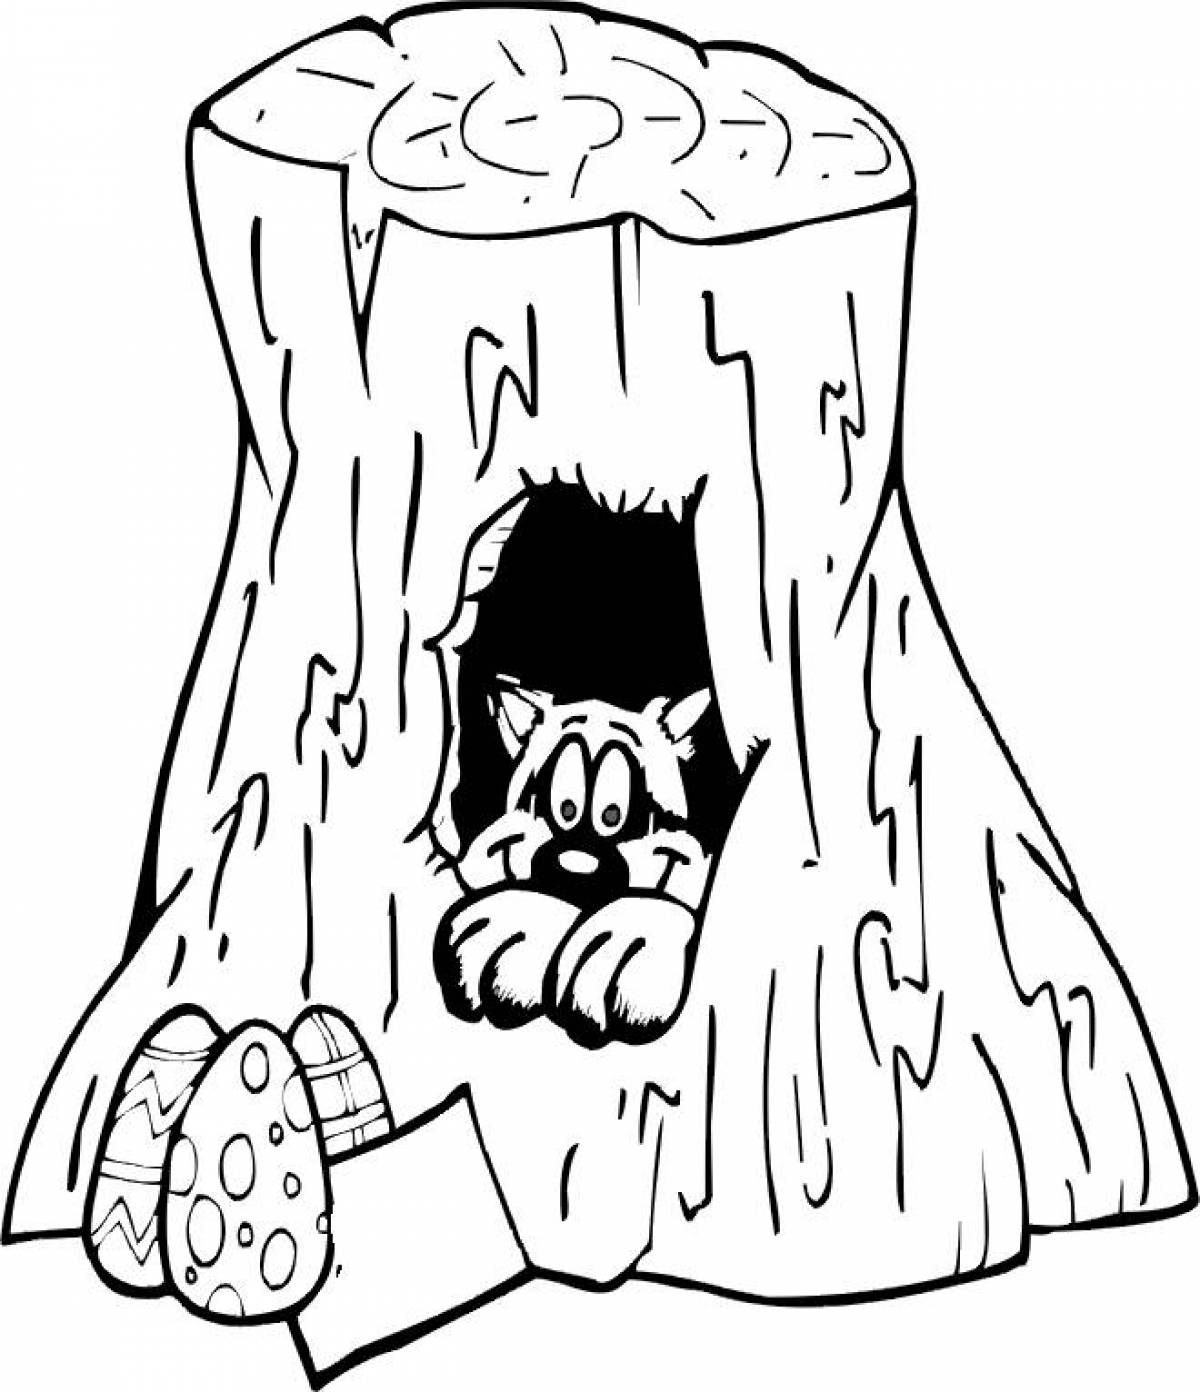 Tree stump coloring page